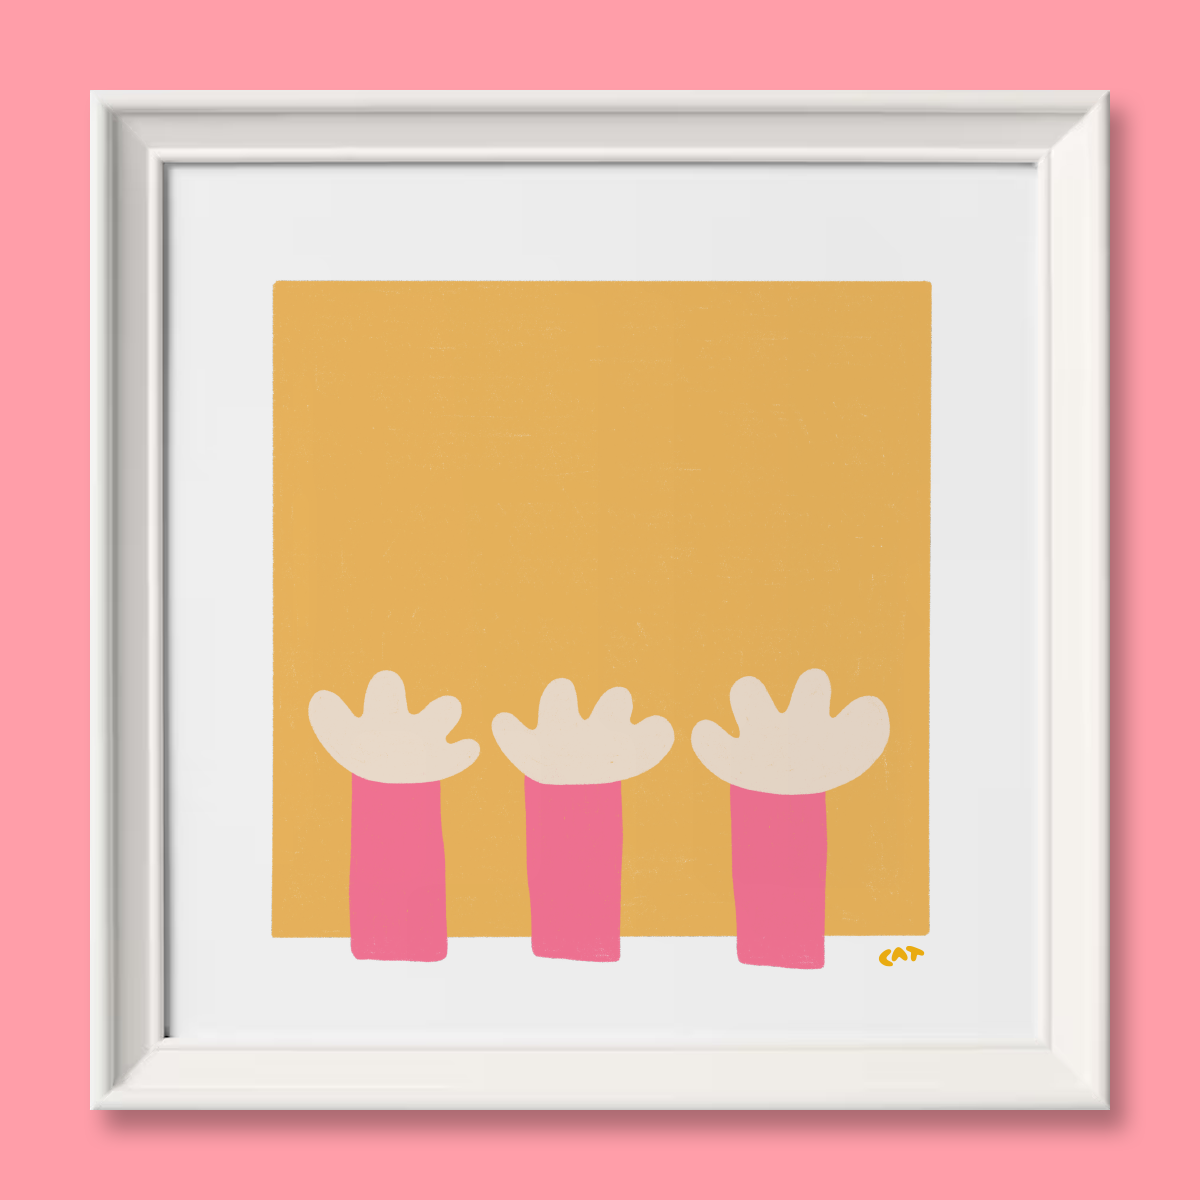 White framed print of a yellow square with pink and white flower like objects.